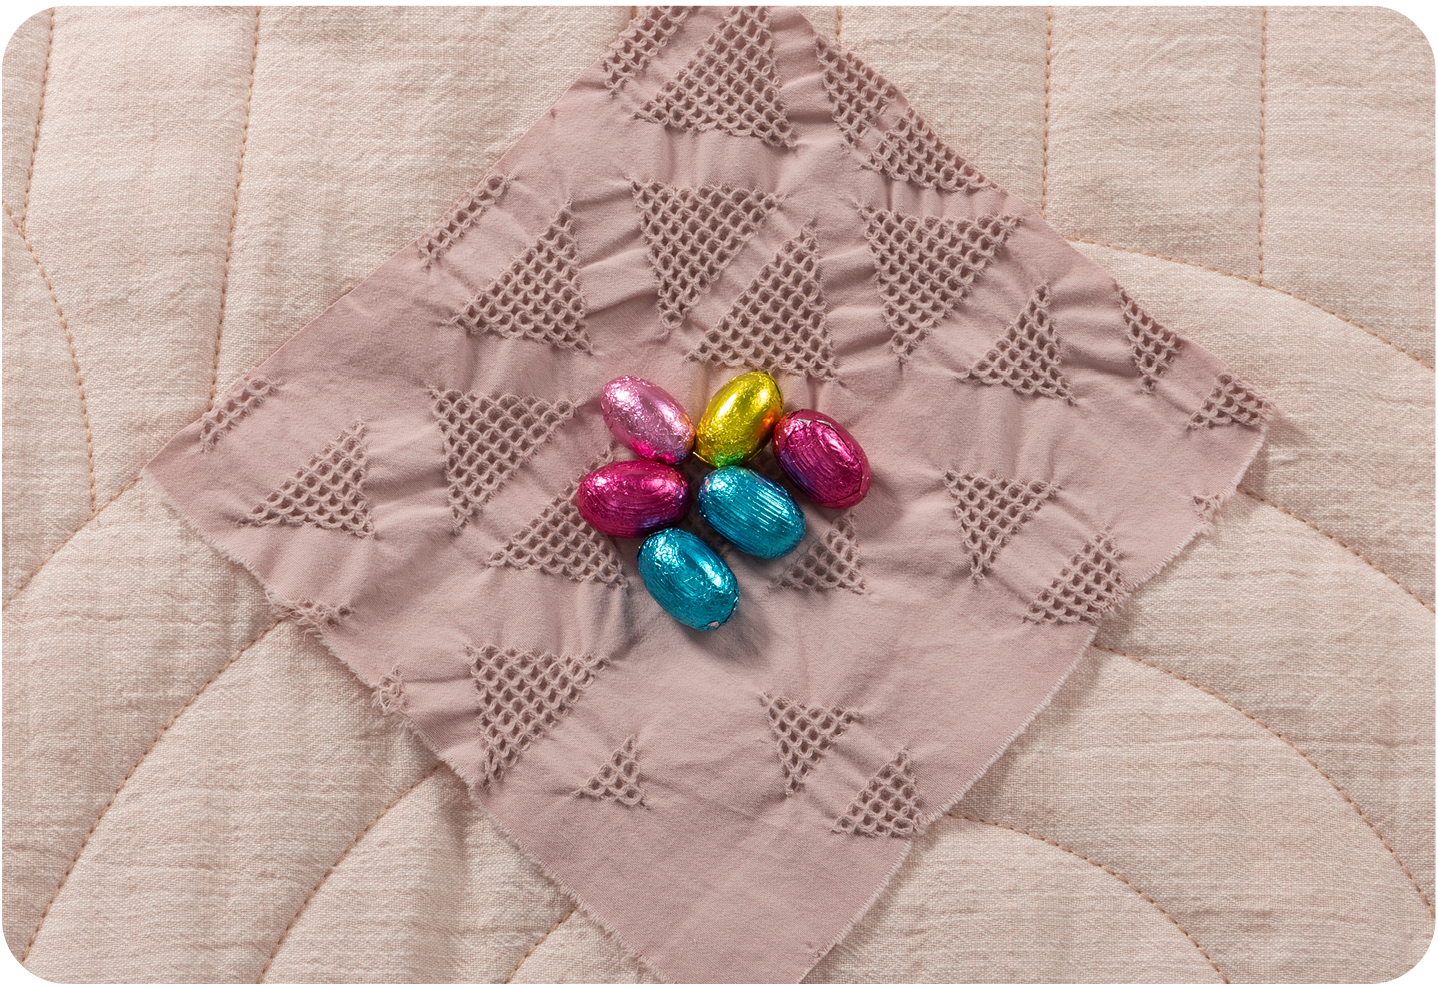 Chocolate eggs in bright pastel coloured wrappers in the centre of a diamond of fabric.